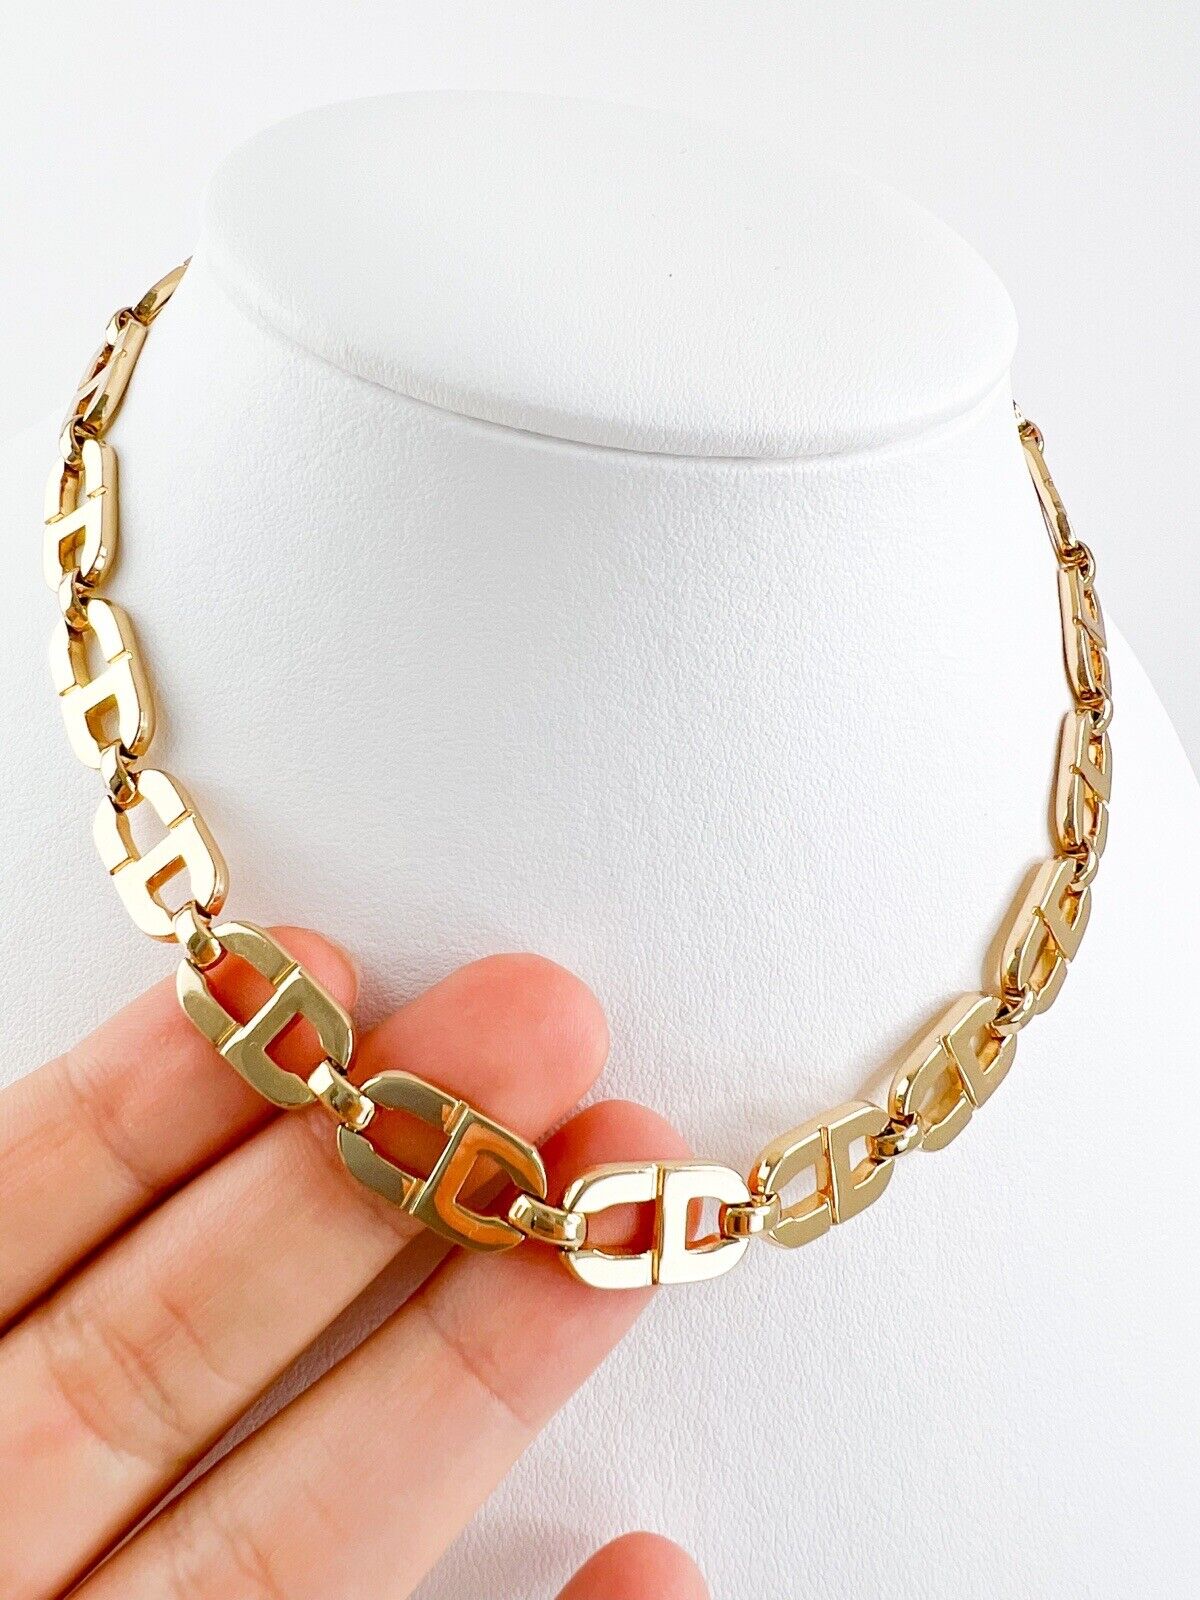 Christian Dior Vintage Chain Necklace, Gold Choker Necklace, CD Logo